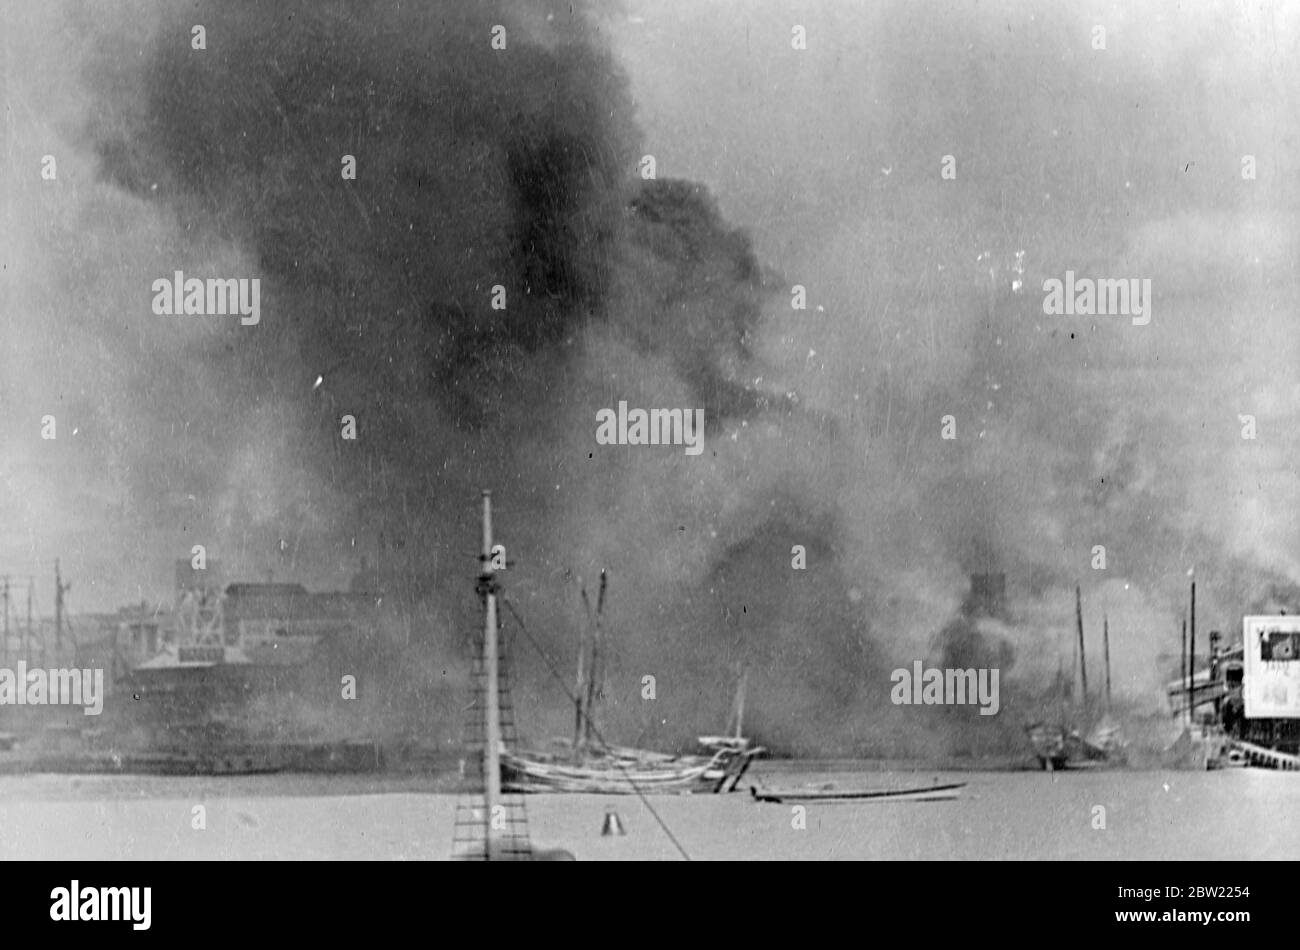 The clouds of black smoke rising from the big fires started in, Pootung, Shanghai [Pudong] by Japanese bombardments. Pootung lies on the bank of the Whangpoo River [Huangpu River] opposite to the main city in the Chinese positions there had been relentlessly bombed by Japanese aircraft. 21 September 1937 Stock Photo